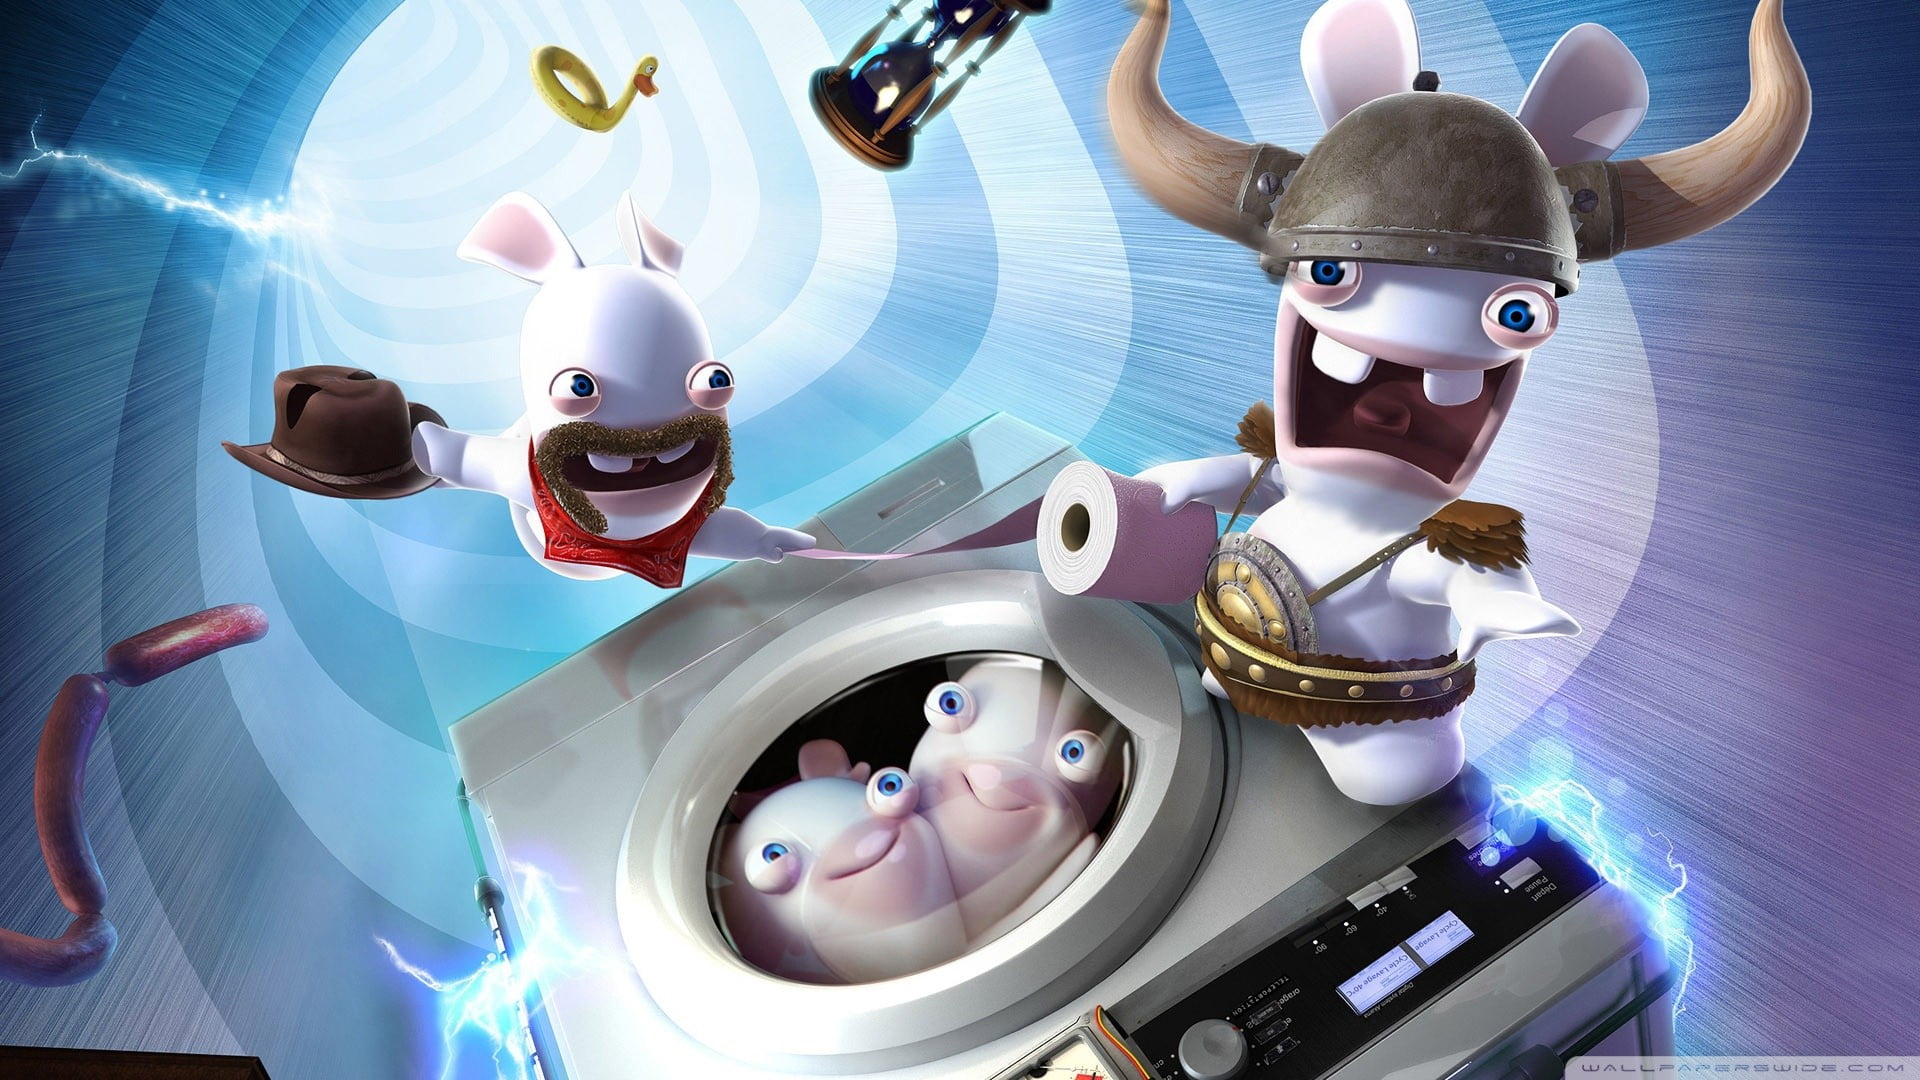 four white cartoon characters 3D wallpaper, Rabbids, video games